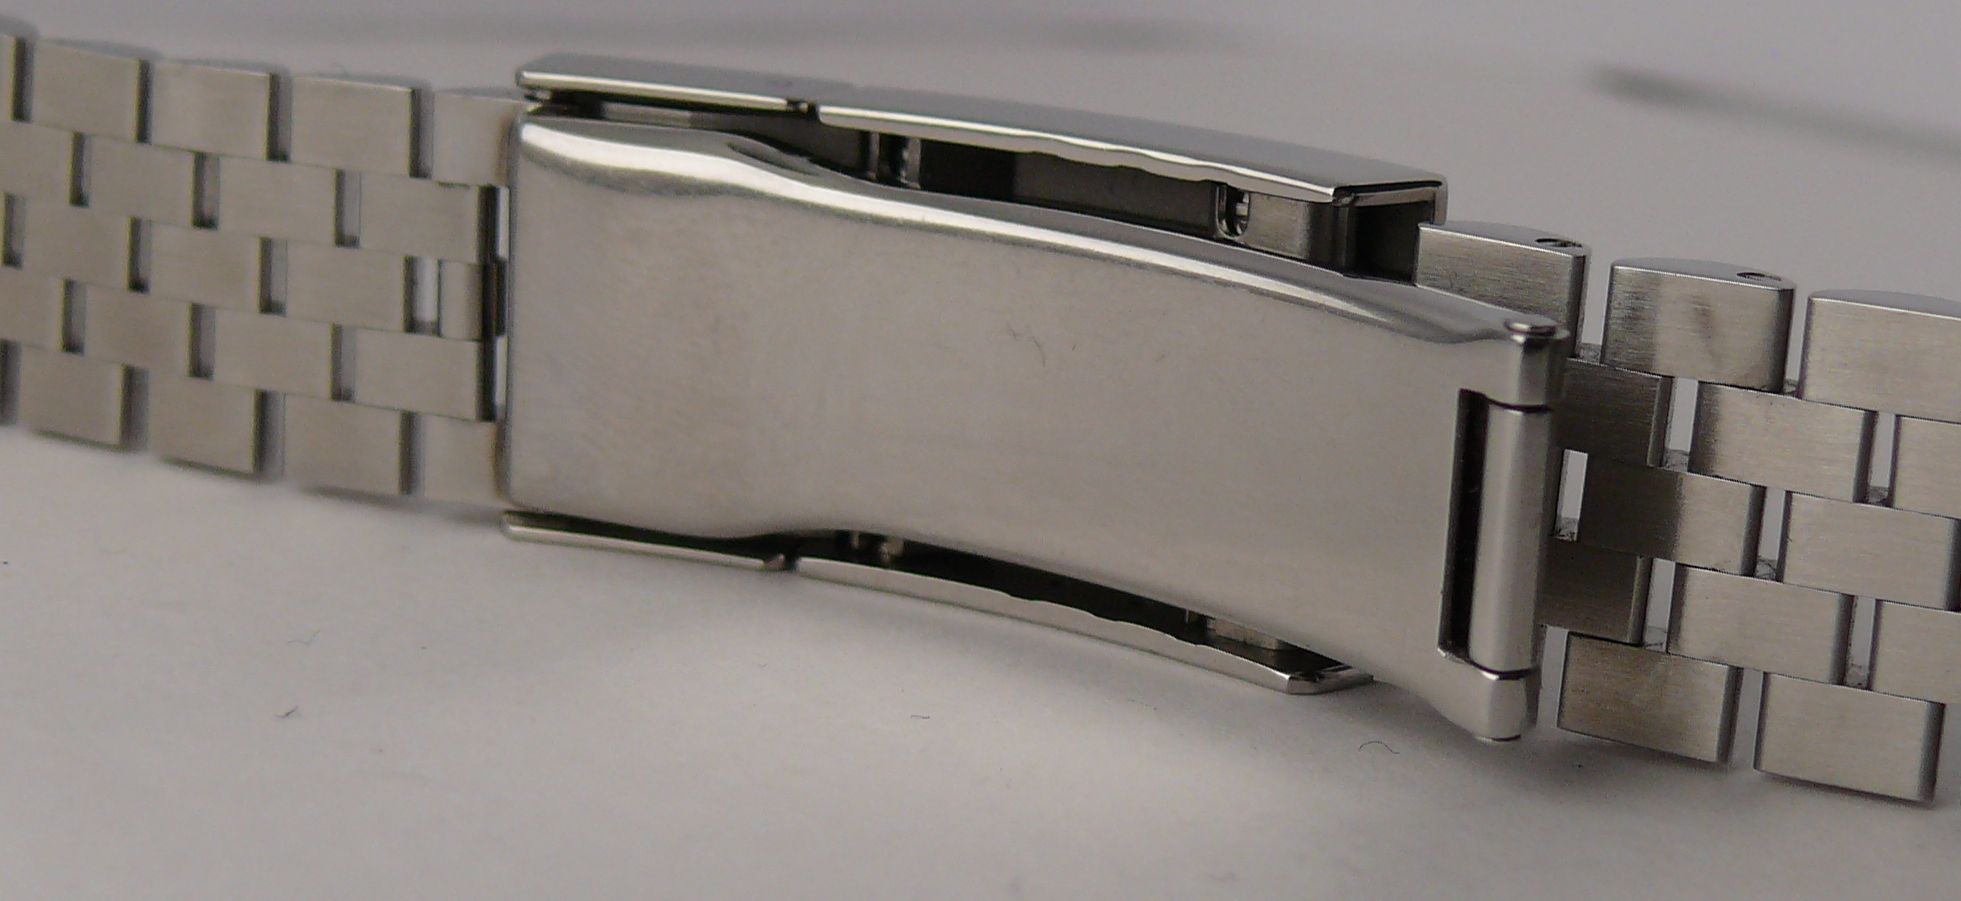 Genuine Rolex 20 mm Jubilee Bracelet 69200 126710 BLNR BLRO. This bracelet is clean and currently - Image 7 of 11